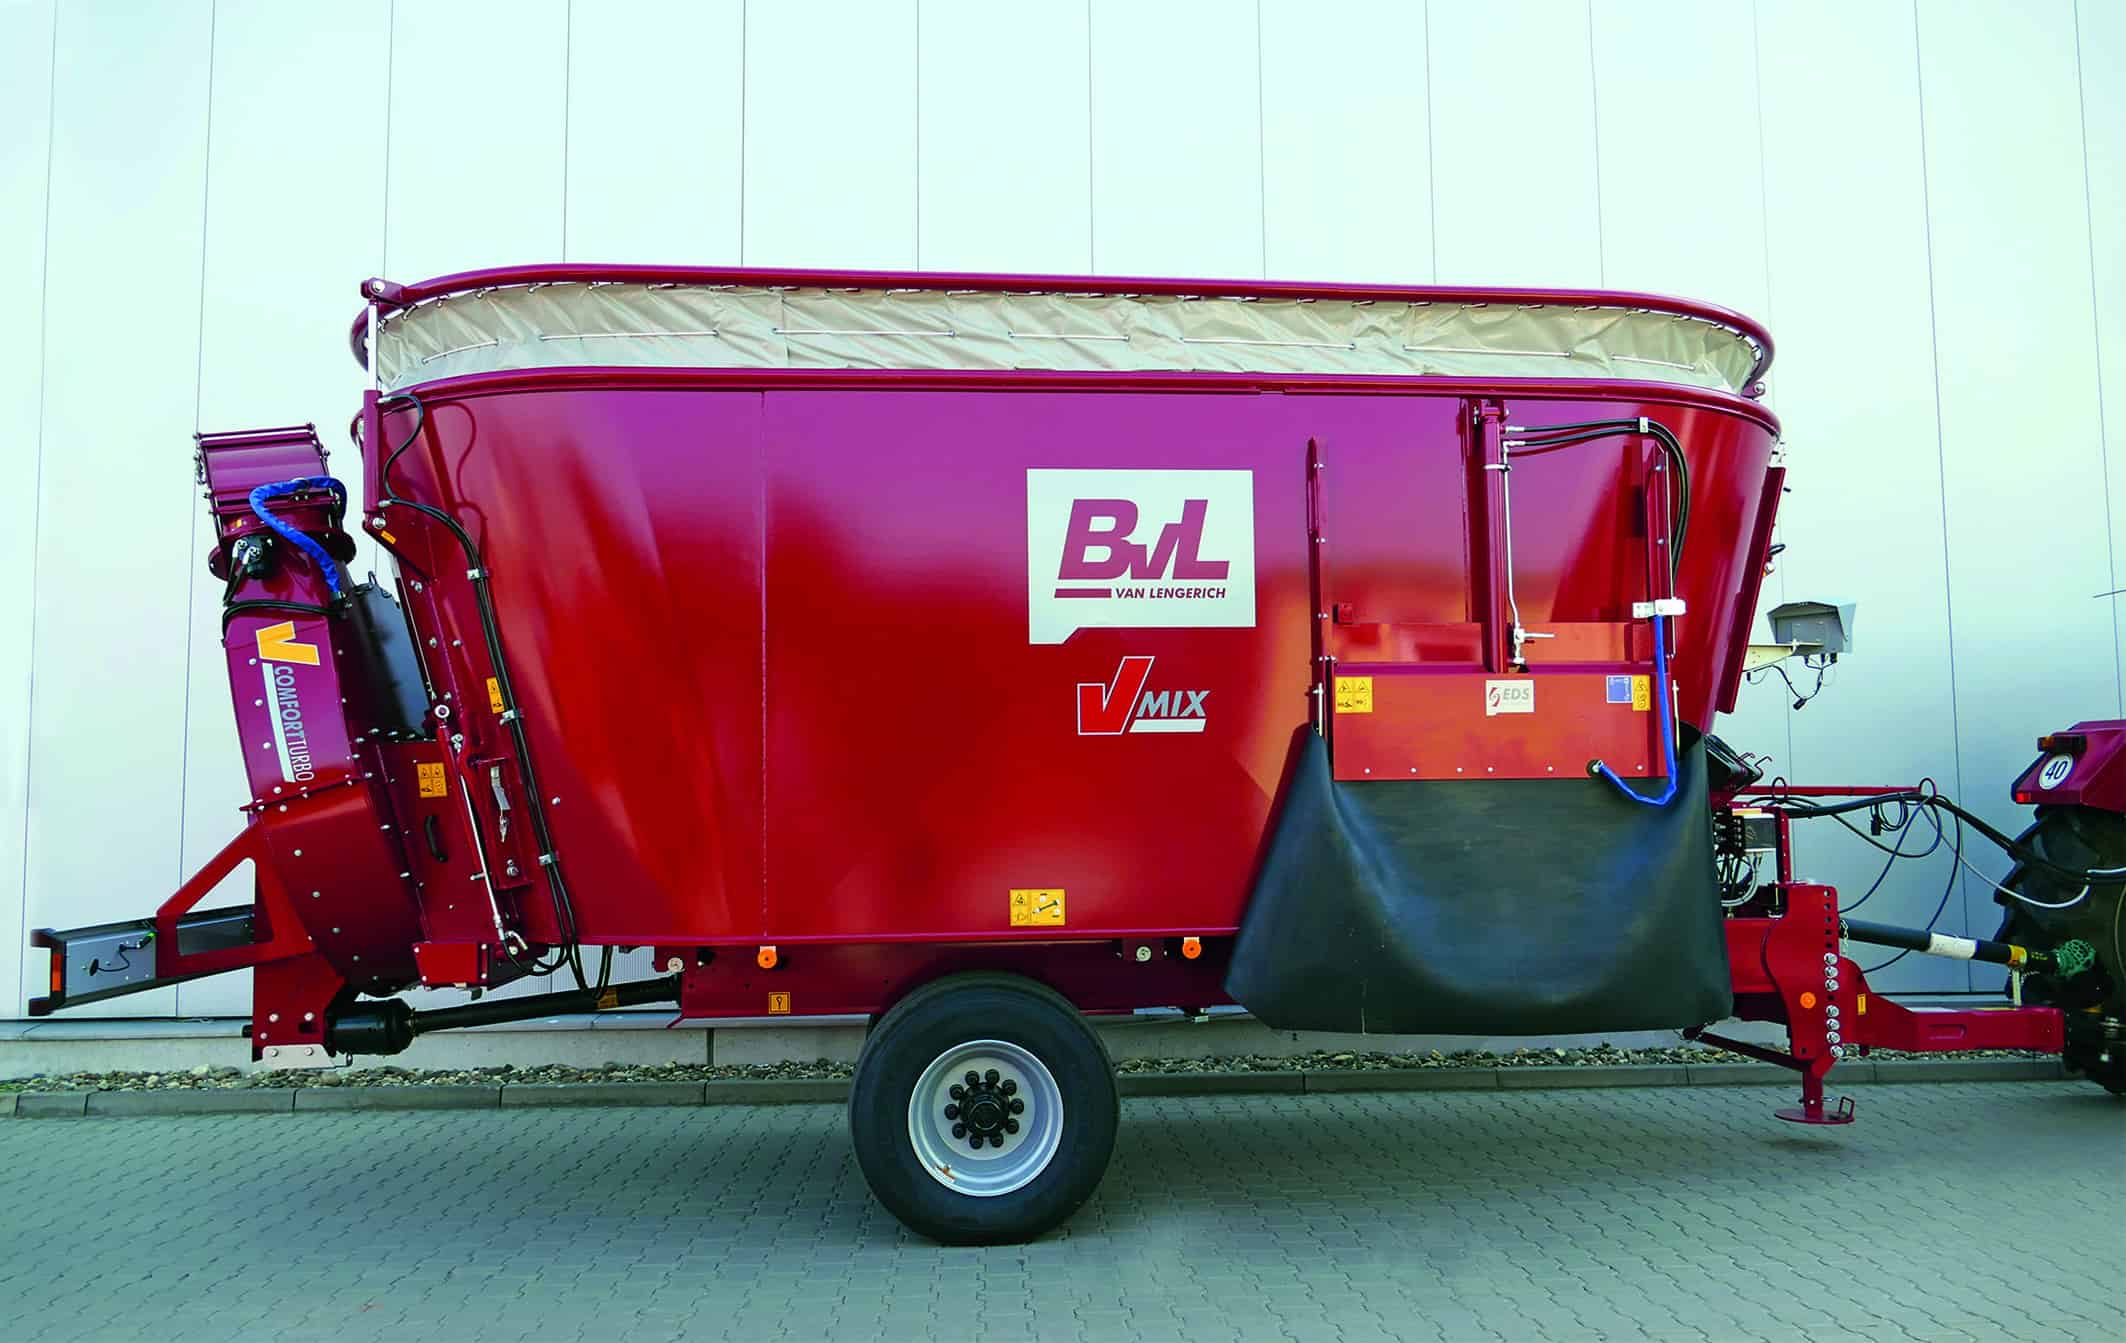 New Vario Volume system ensures flexible container volume for BvL mixer wagons